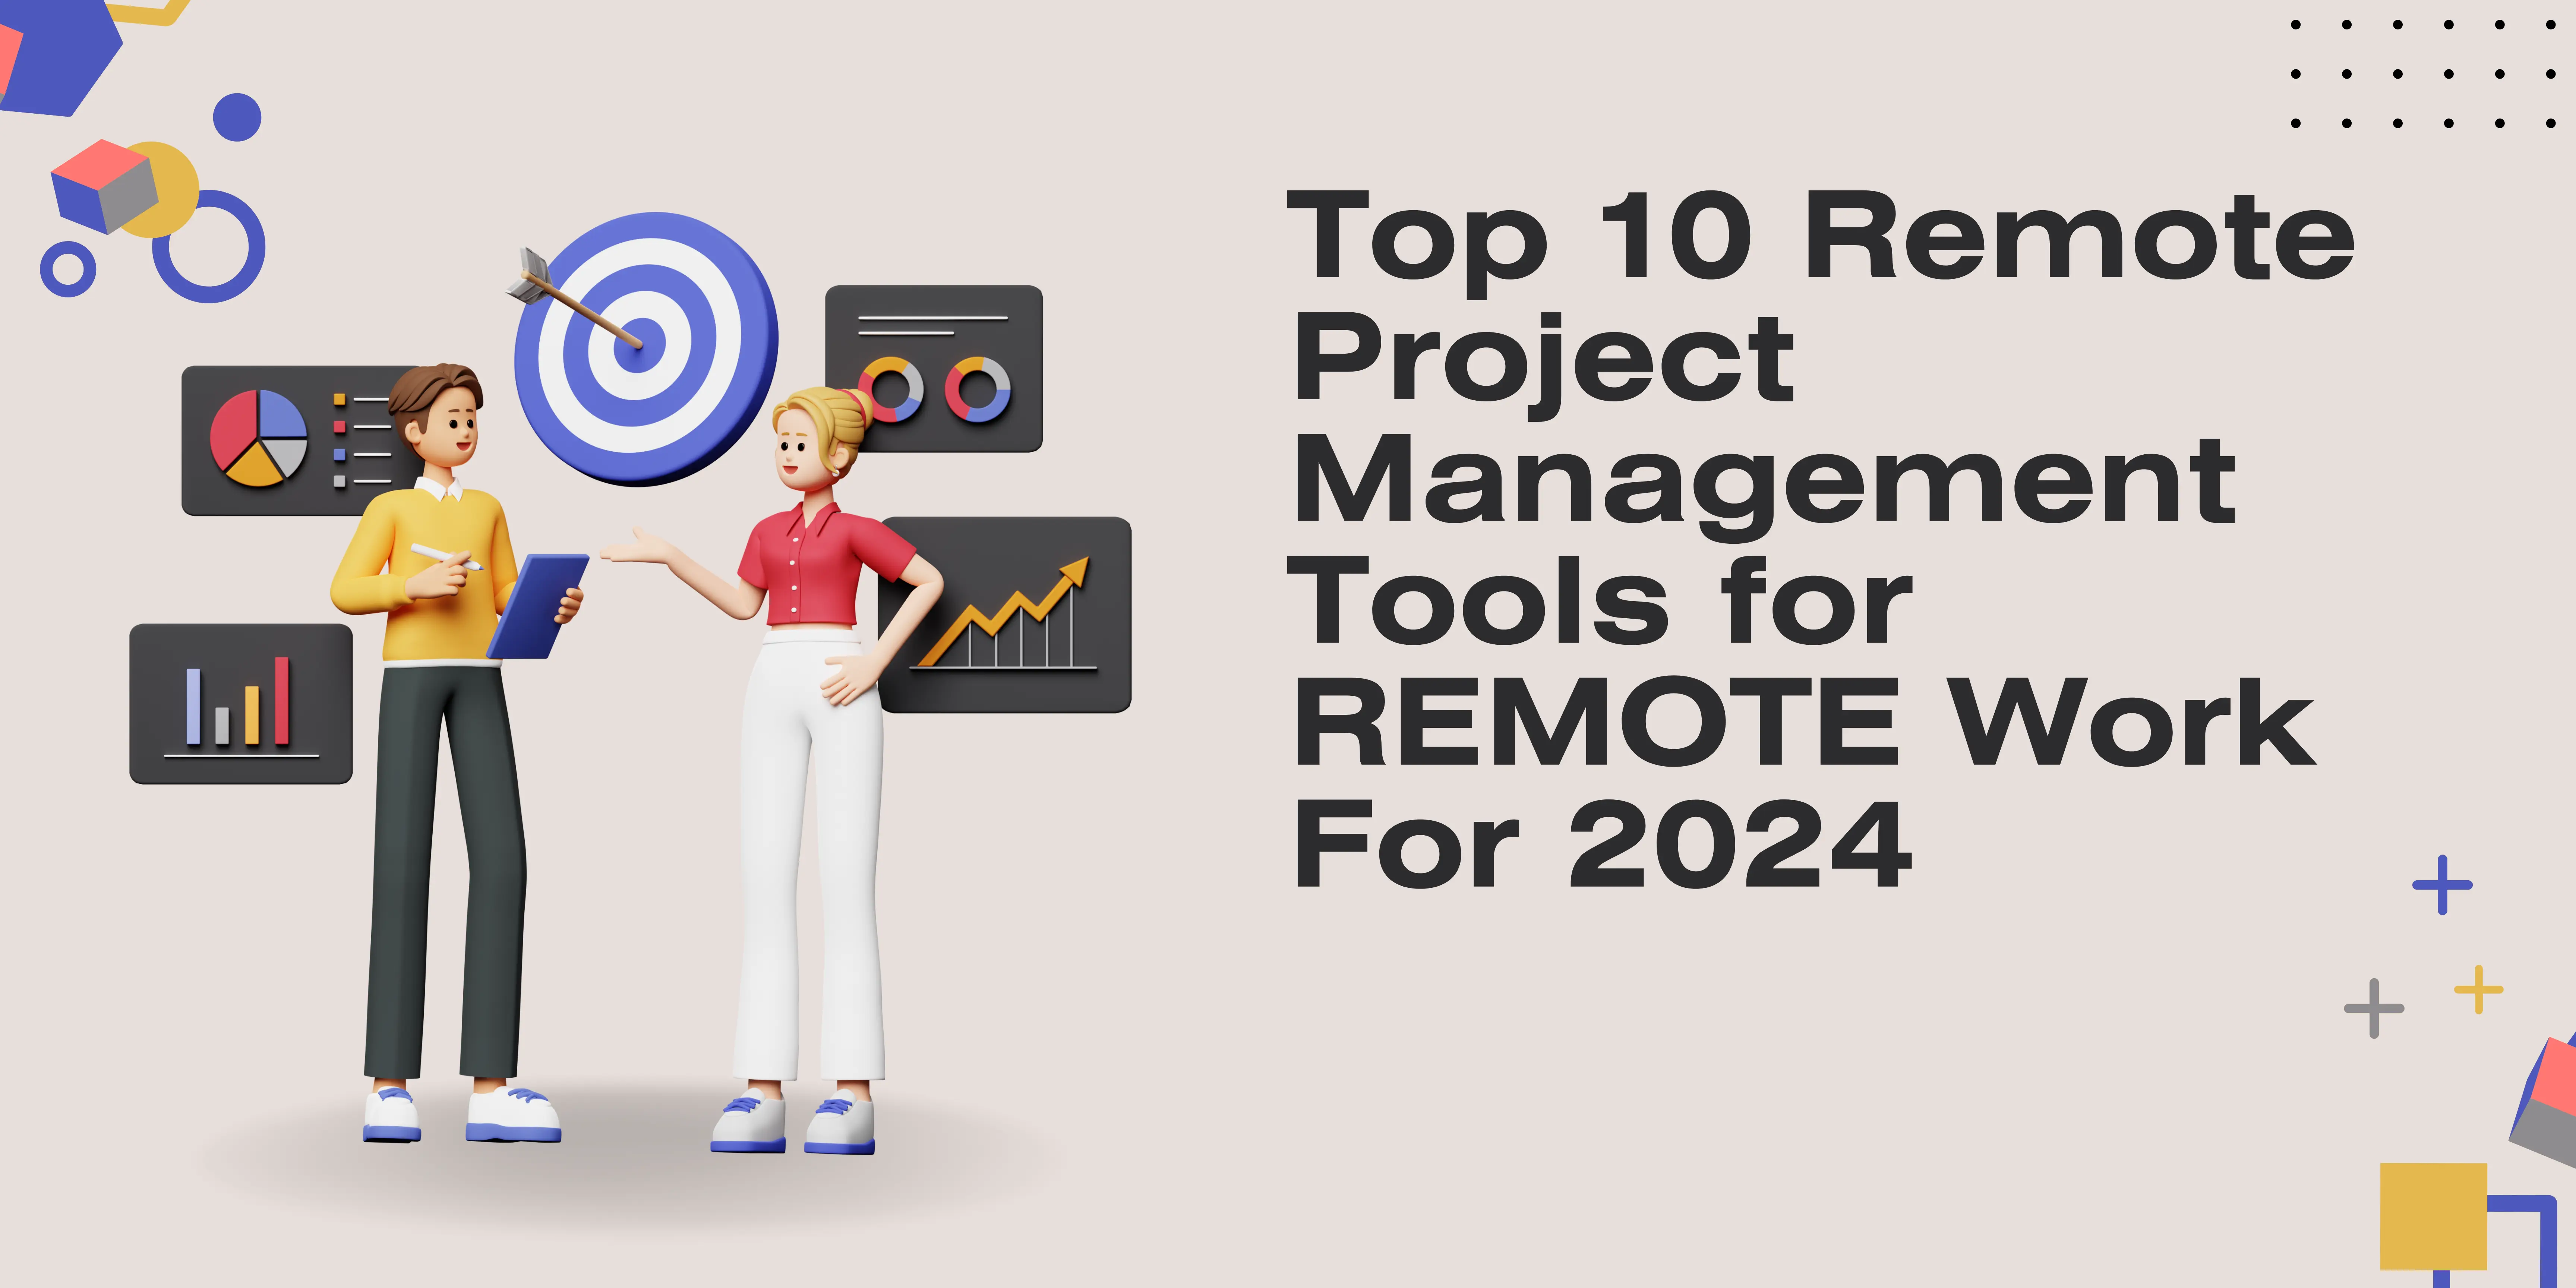 Top 10 Remote Project Management Tools for REMOTE Work For 2024